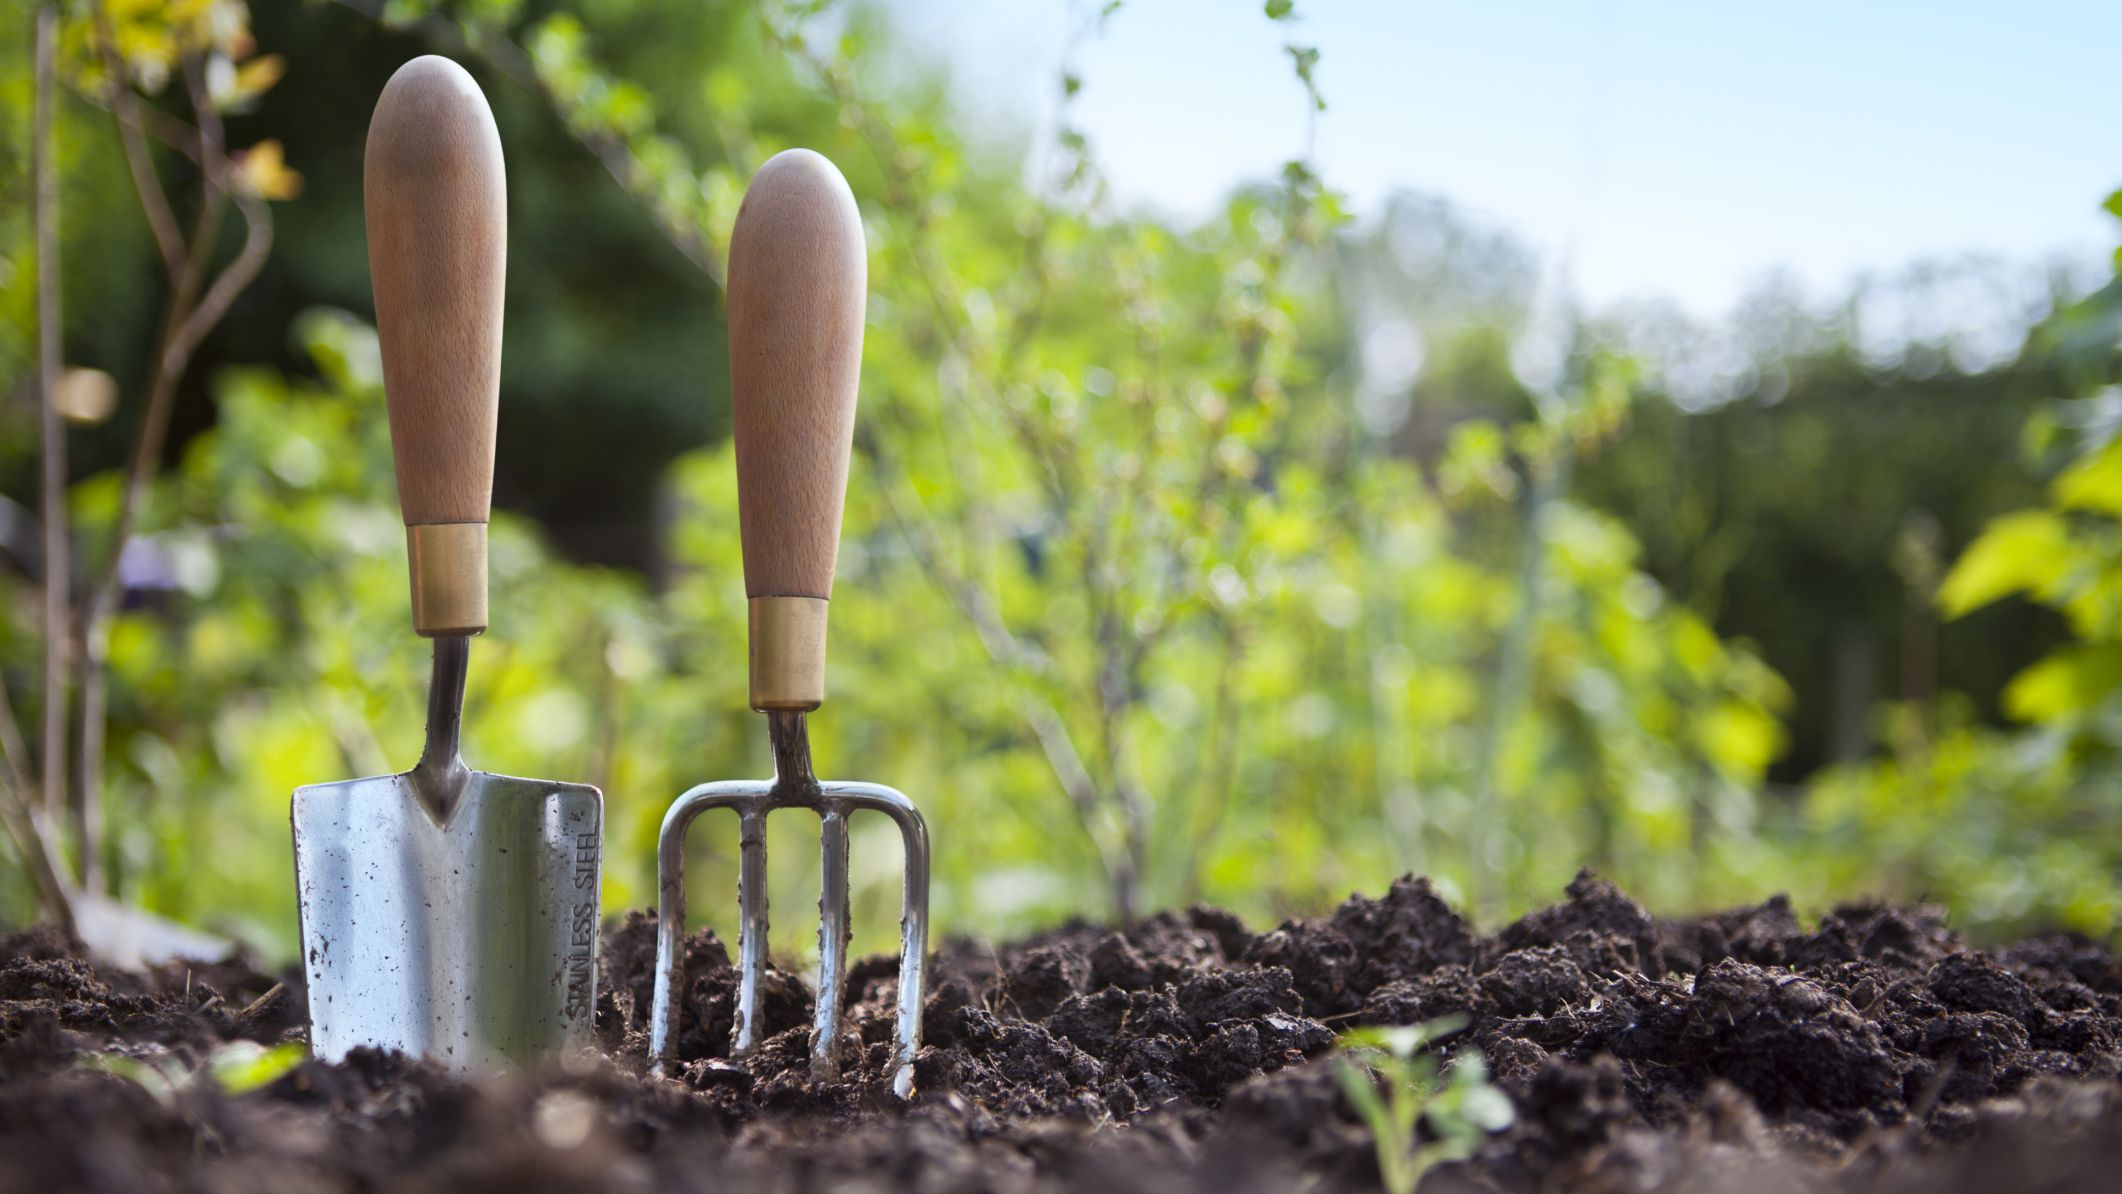 7 Simple tips for the perfect low-maintenance garden